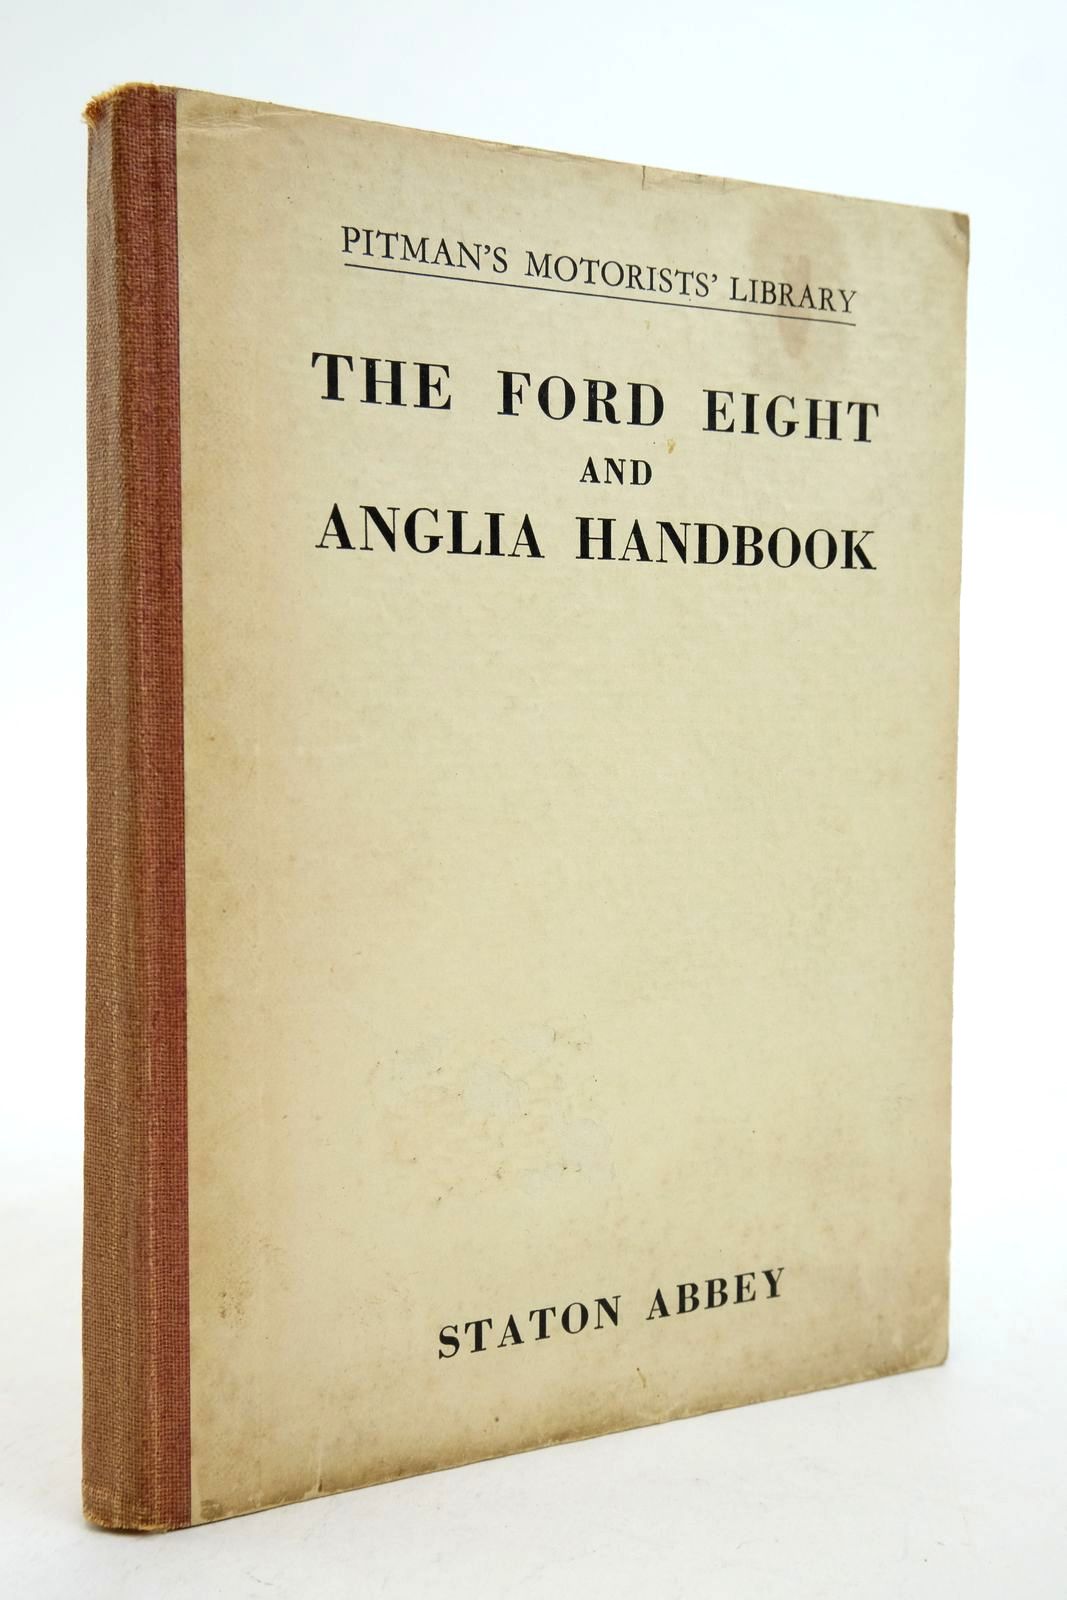 Photo of THE FORD EIGHT AND ANGLIA HANDBOOK written by Abbey, Staton published by Sir Isaac Pitman & Sons Ltd. (STOCK CODE: 2139545)  for sale by Stella & Rose's Books